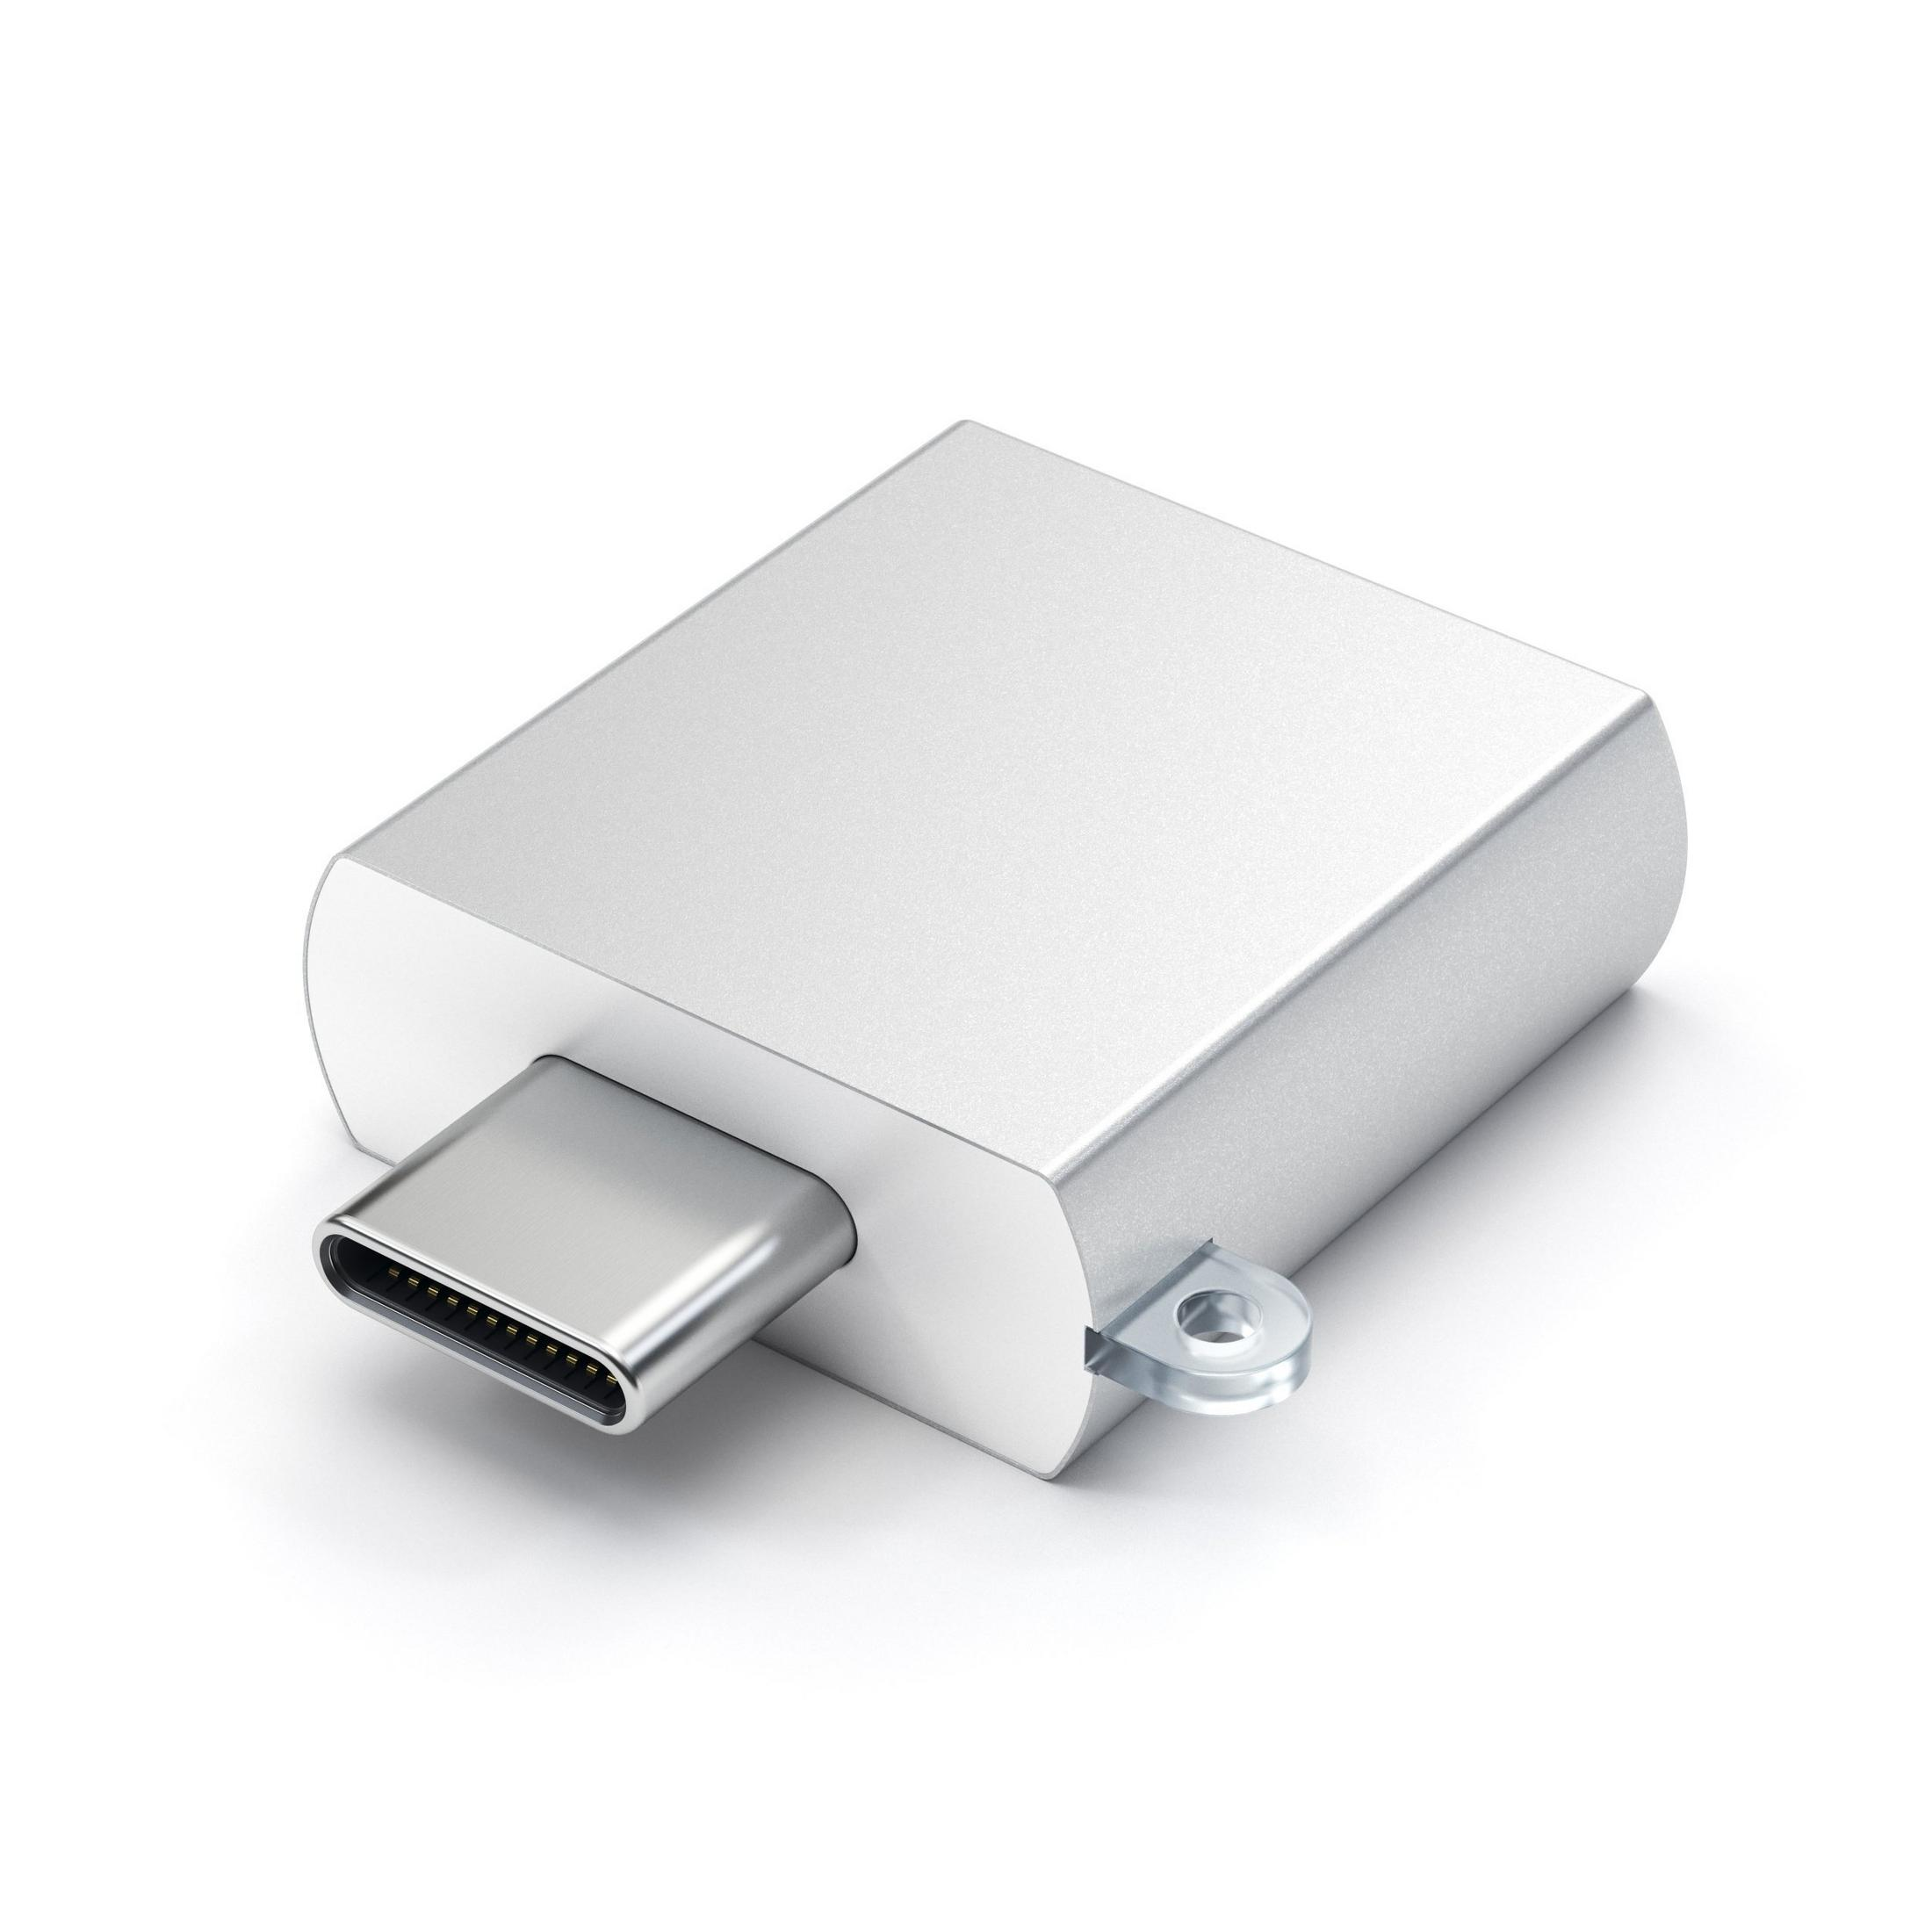 TYPE-C USB SATECHI Silber Adapter, 179965 SILBER ADAPTER